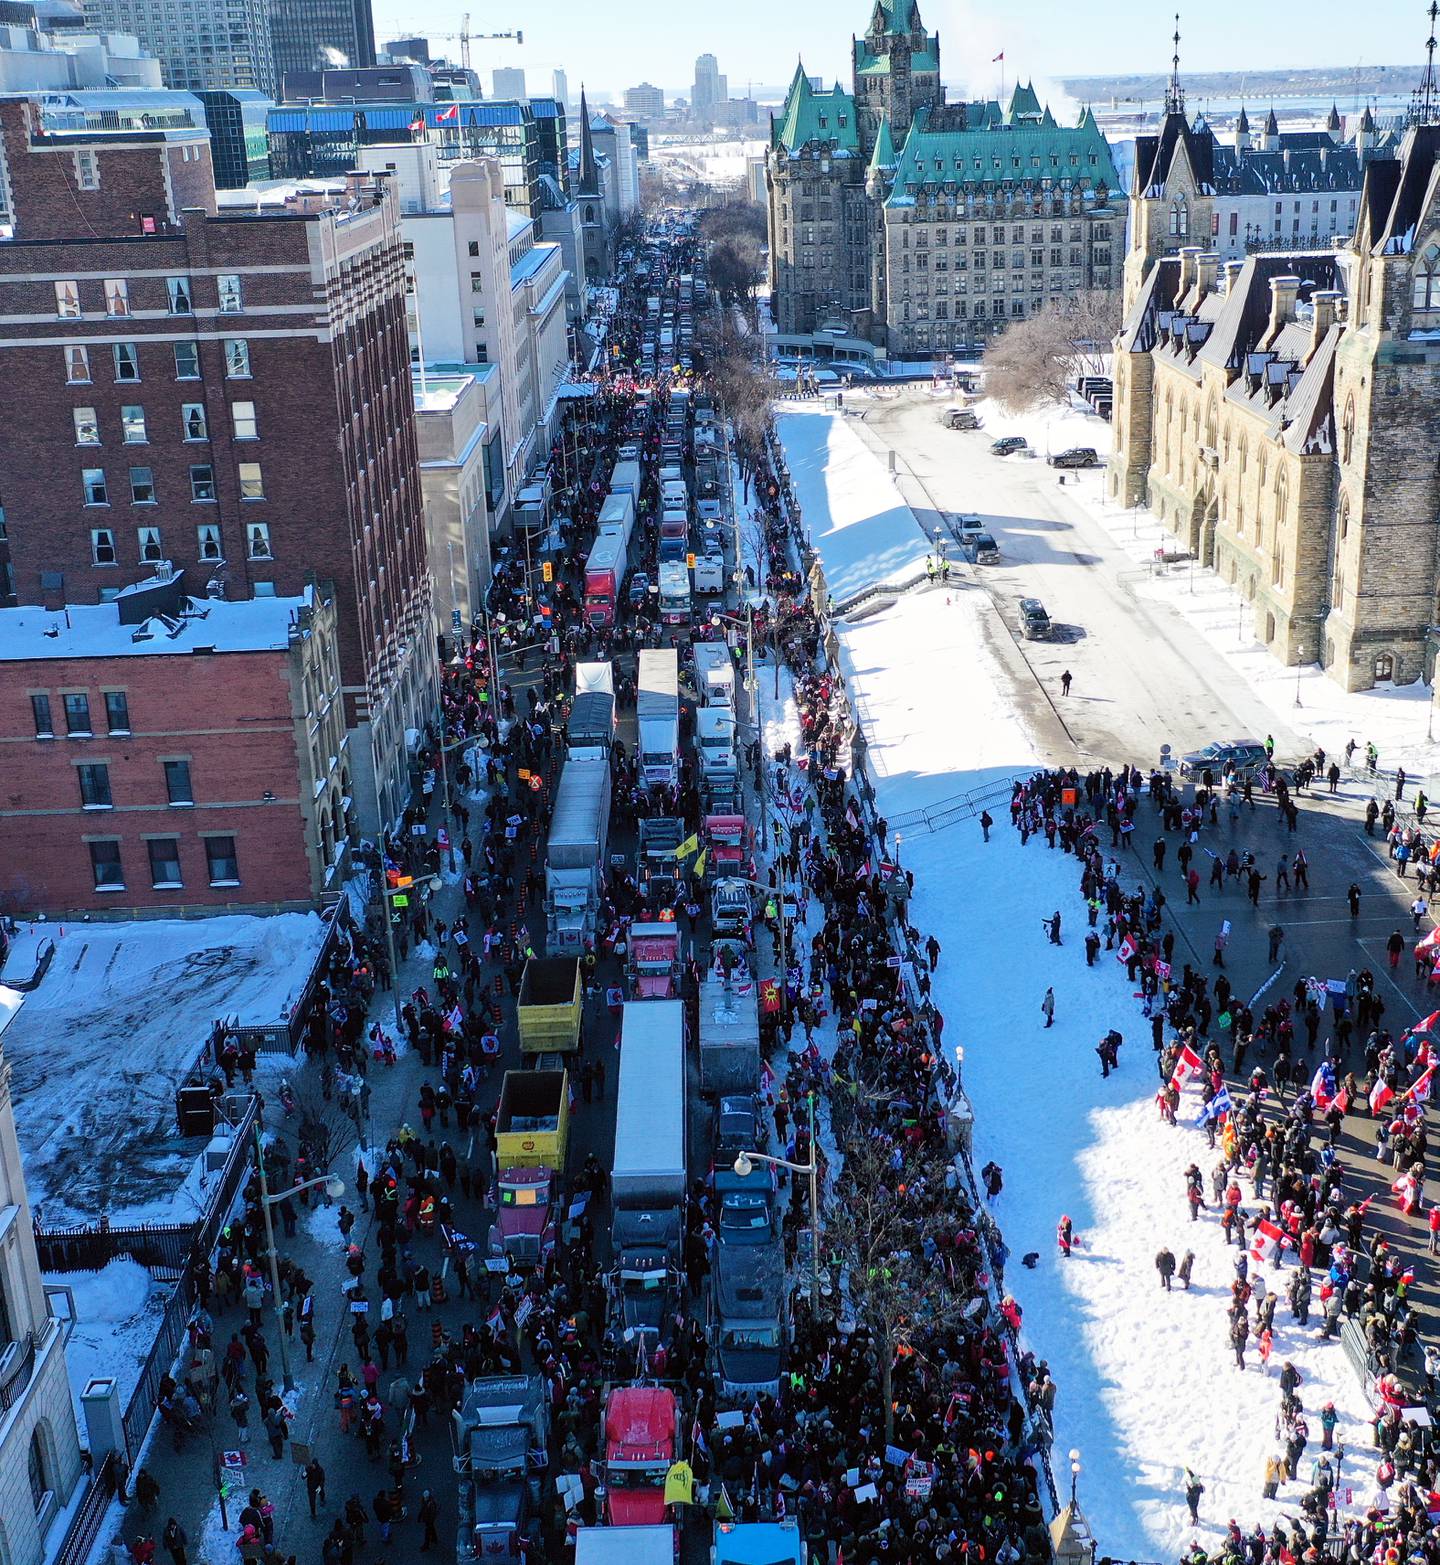 Lorries block the street as people protest in front of Parliament Hill in Ottawa. EPA